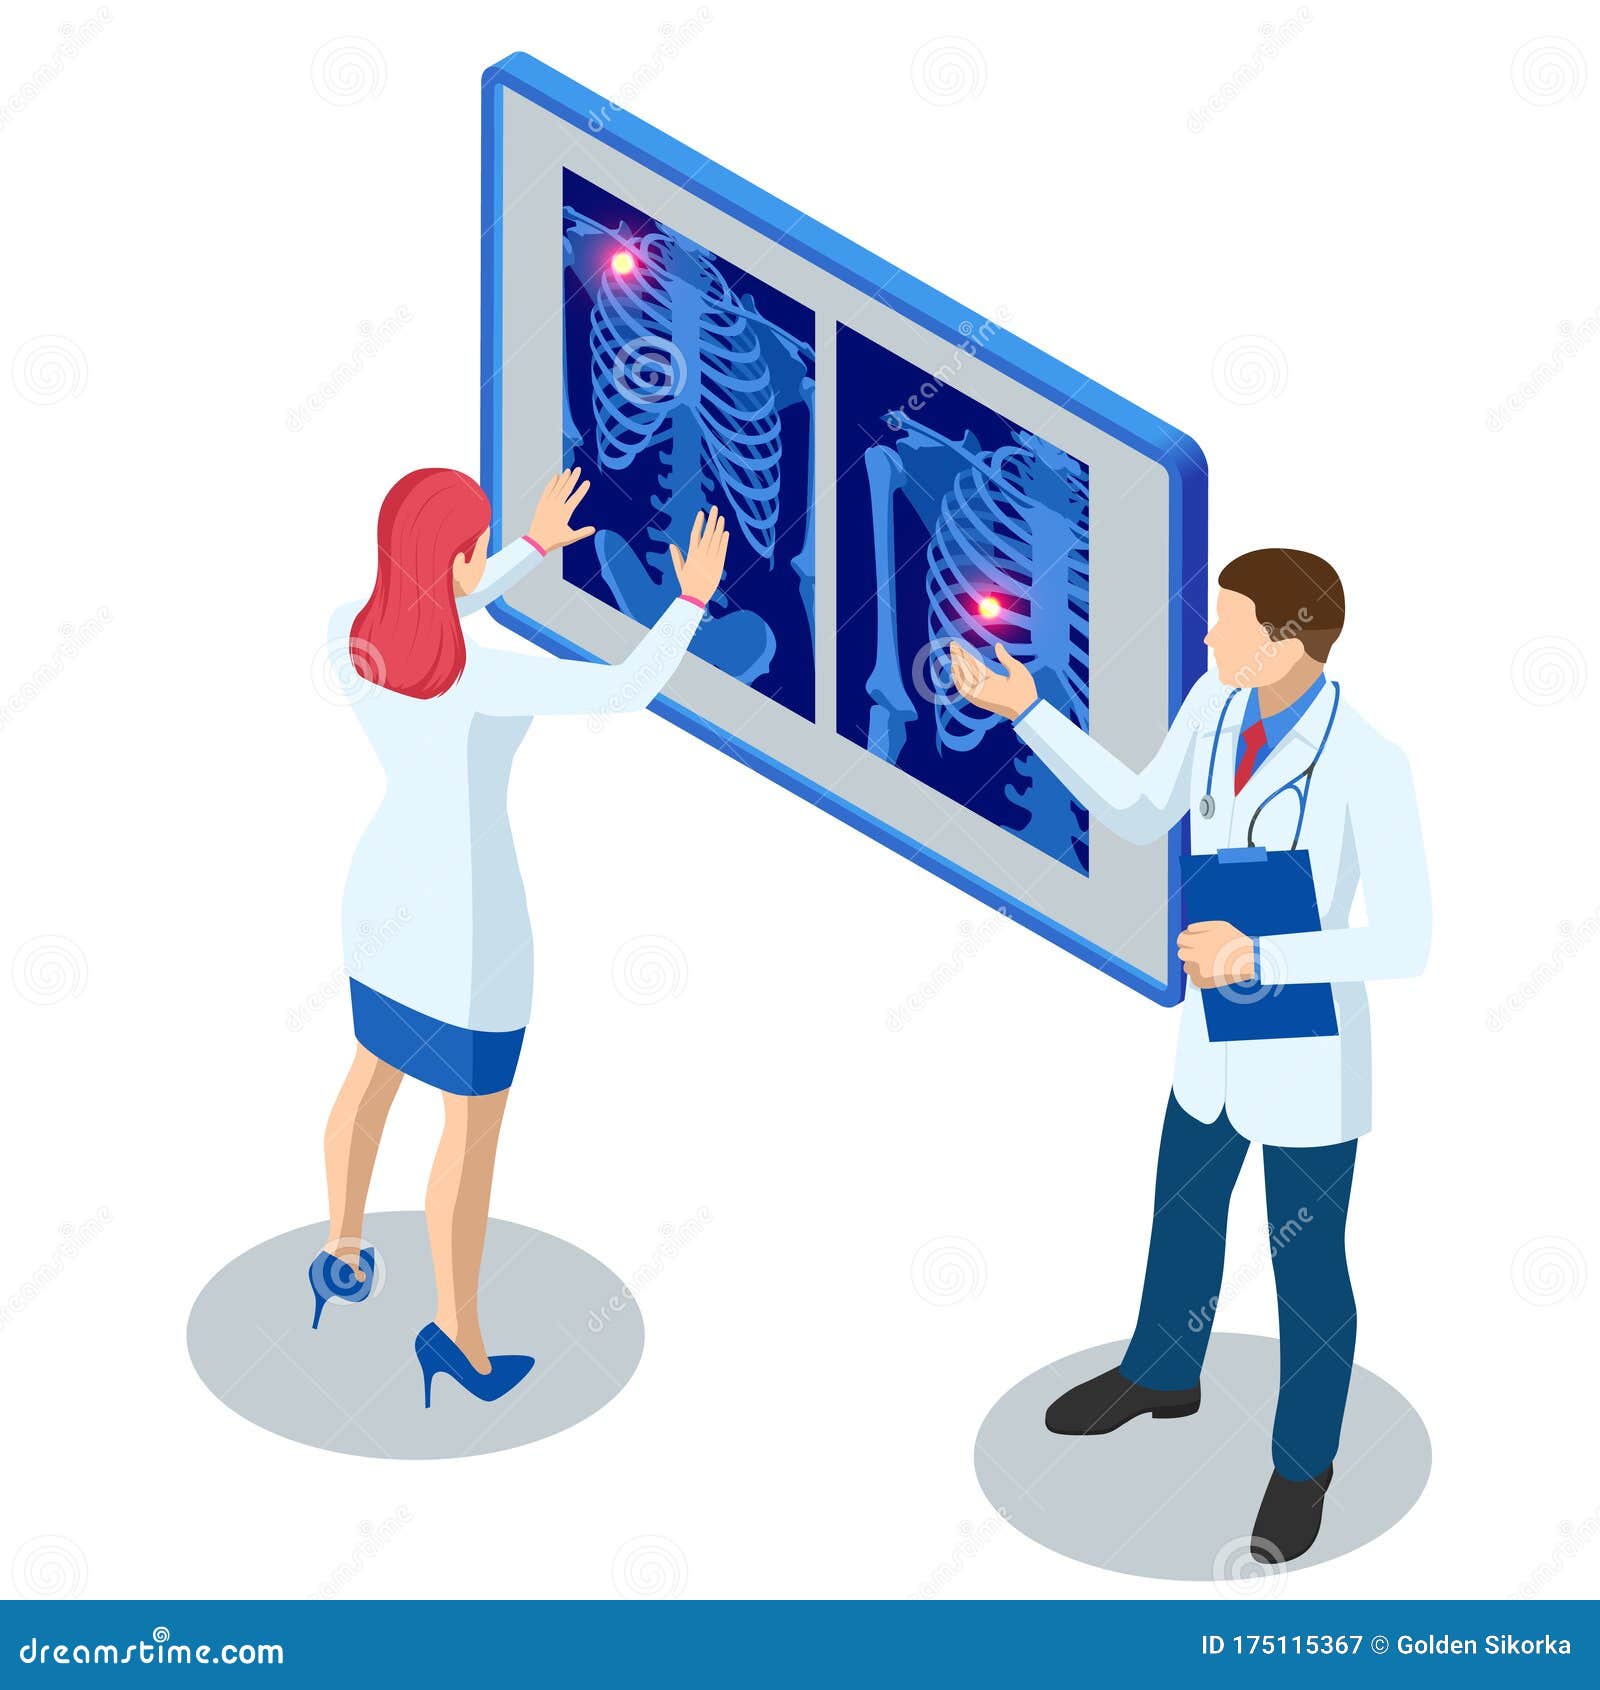 isometric x-ray machine for scanning human body. doctor checking examining chest x-ray film of patient. roentgen of